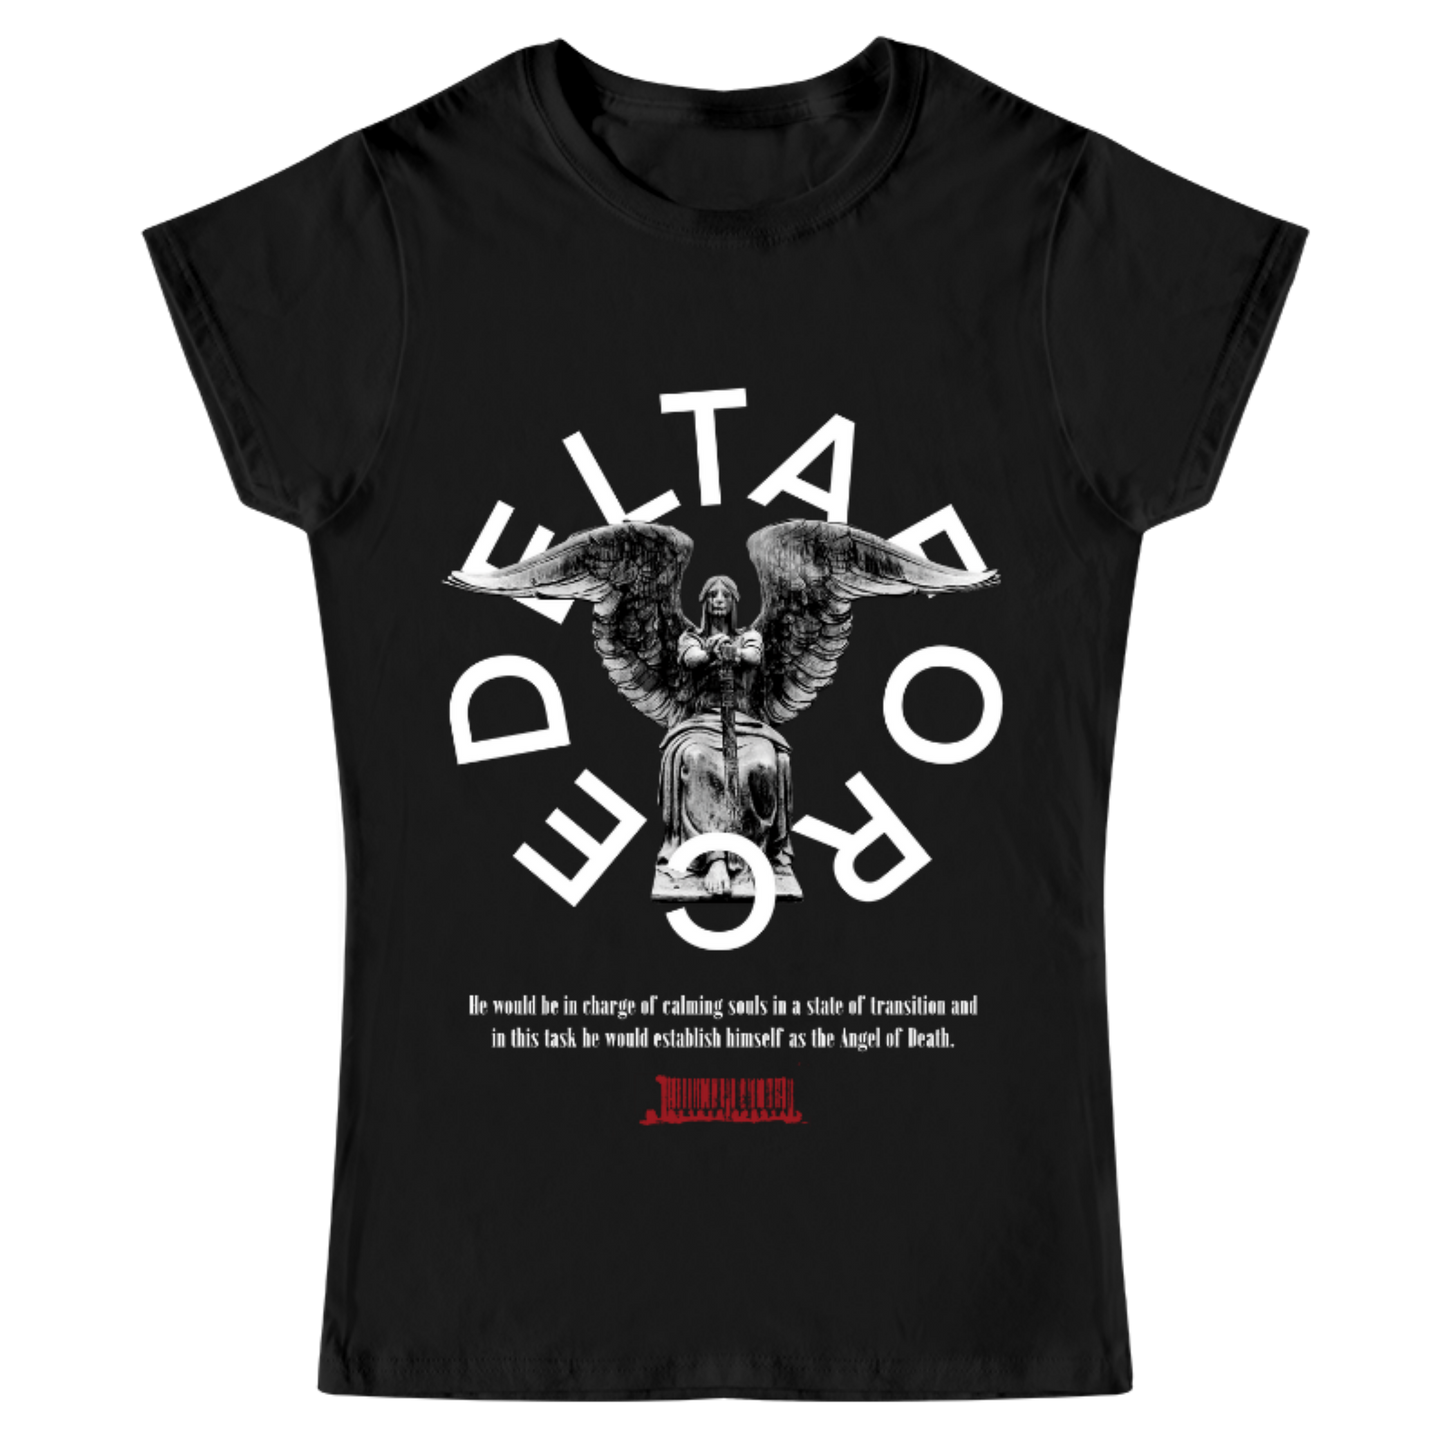 PLAYERA MUJER "ANGEL OF DEATH" DELTA FORCE